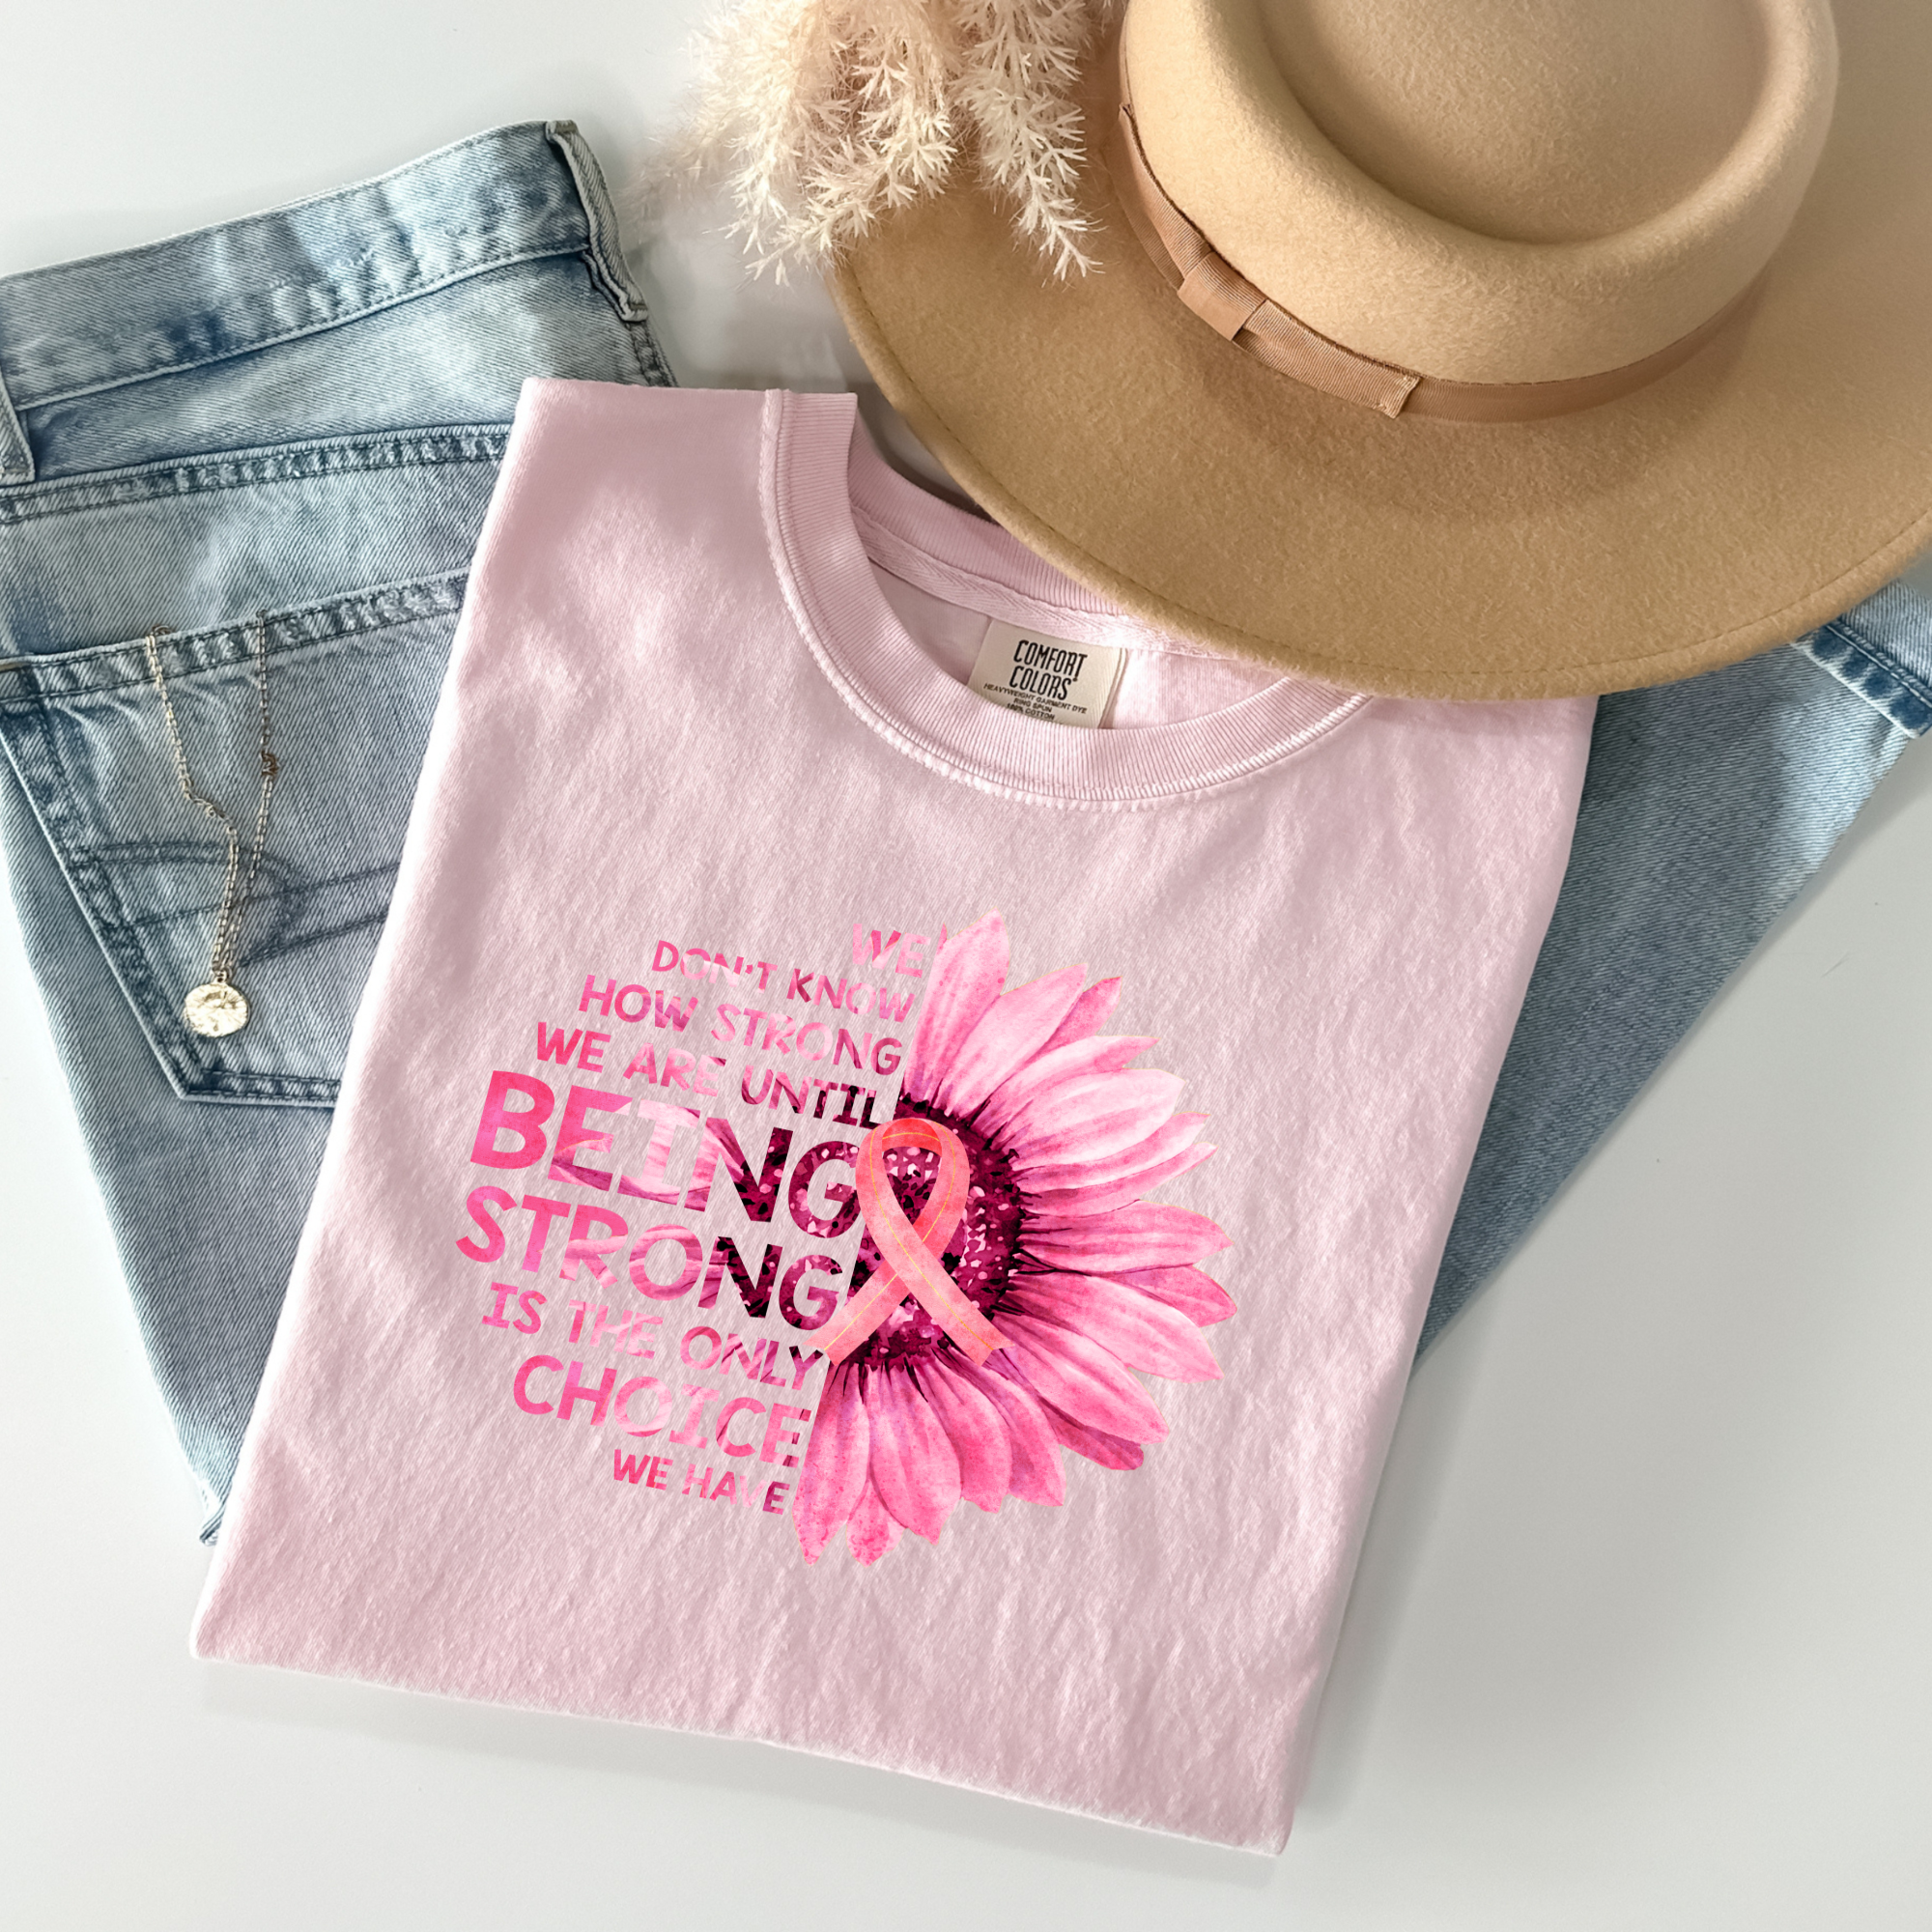 Breast Cancer Awareness Shirt - Breast Cancer Support